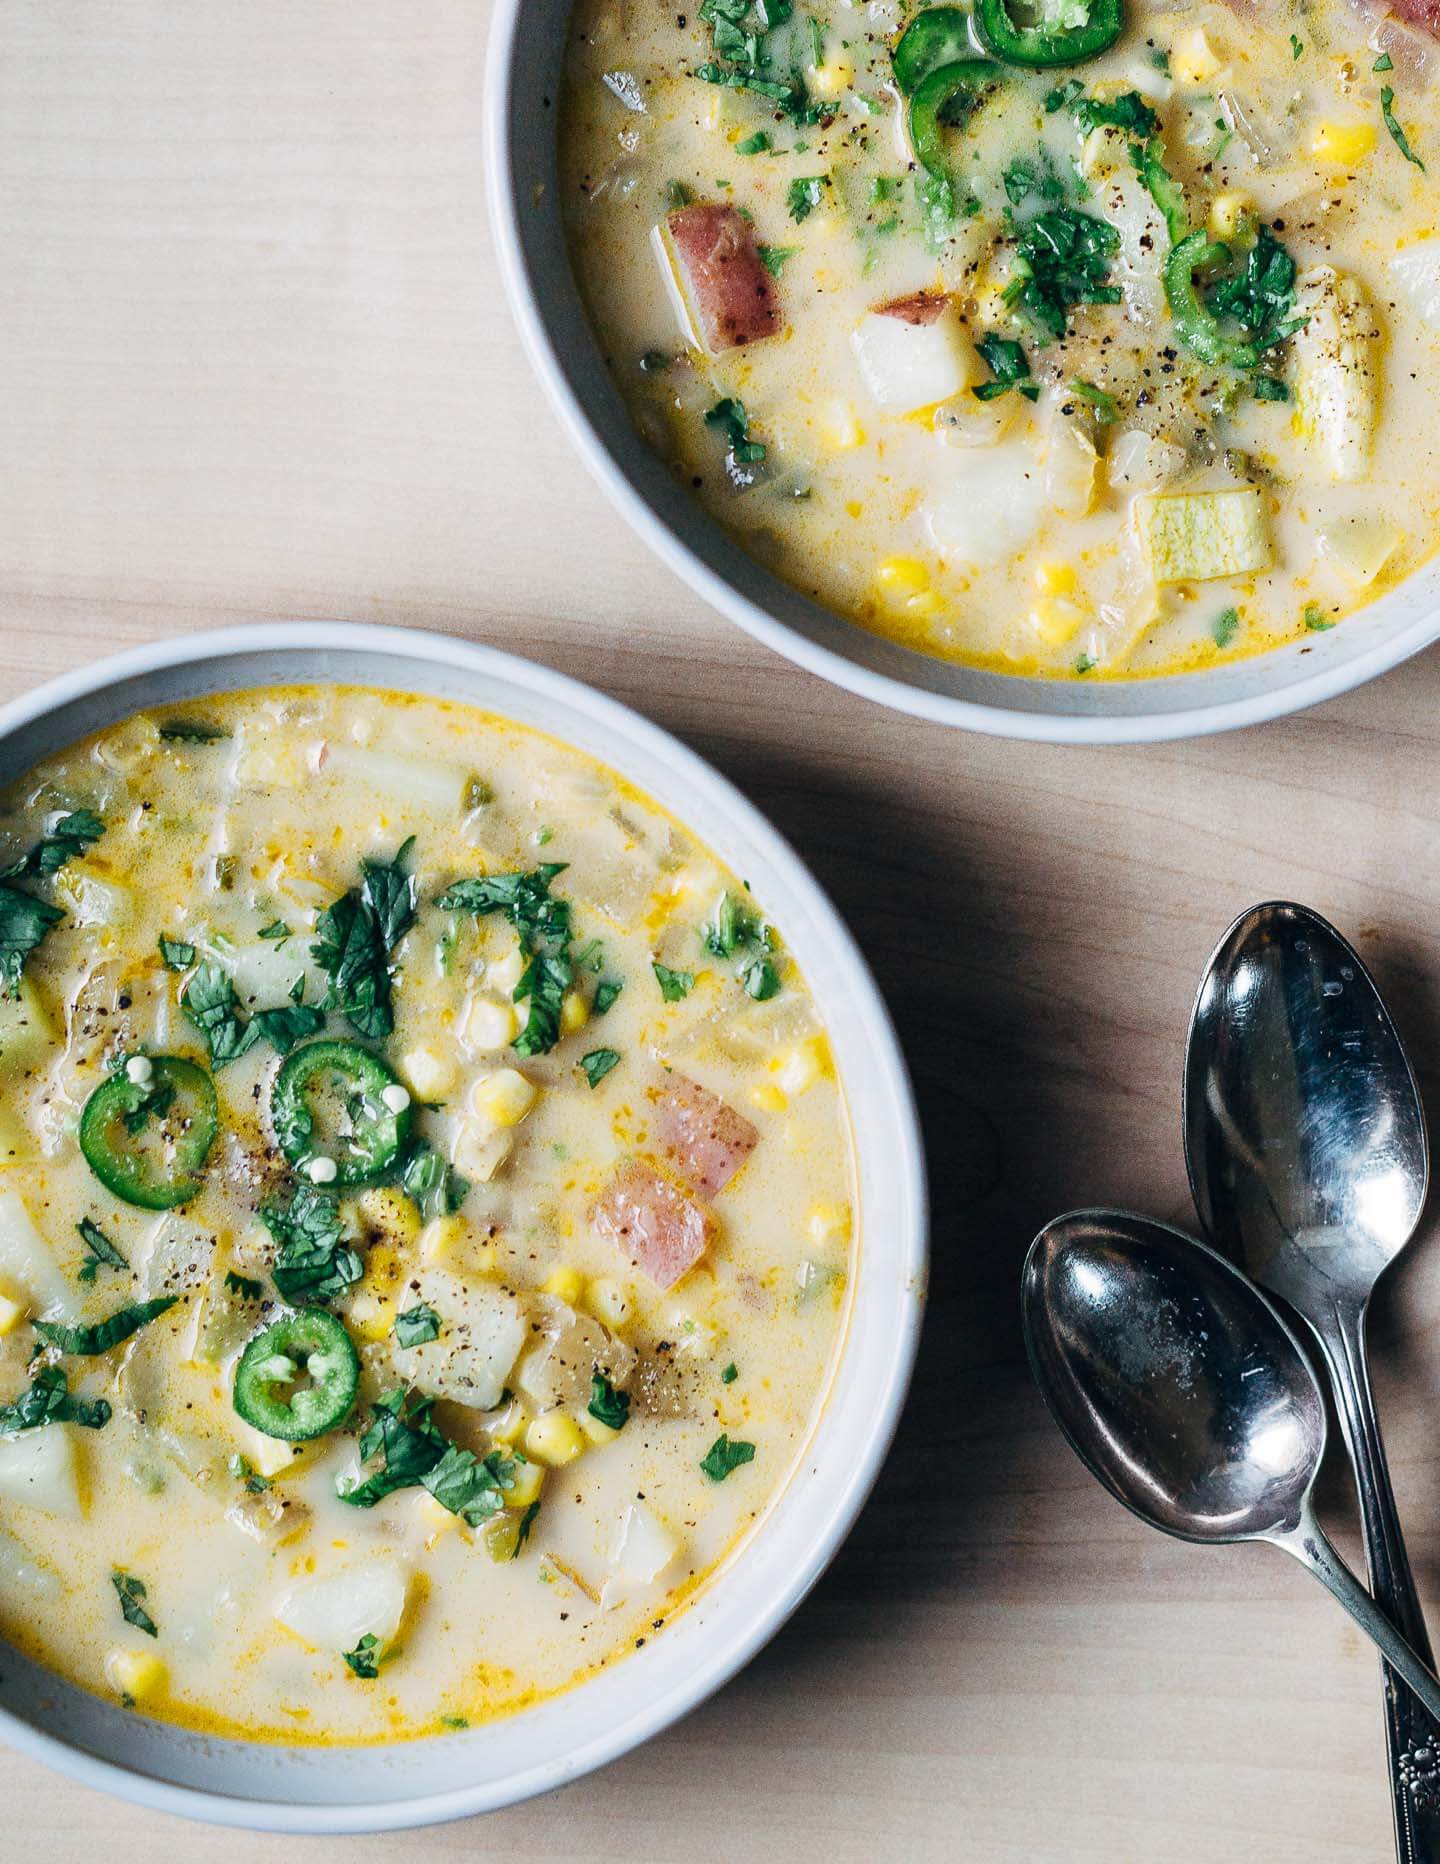 A rich, garden-inspired vegan coconut milk corn chowder with spicy jalapenos and handfuls of vegetables that feels just right for these last summer days. 